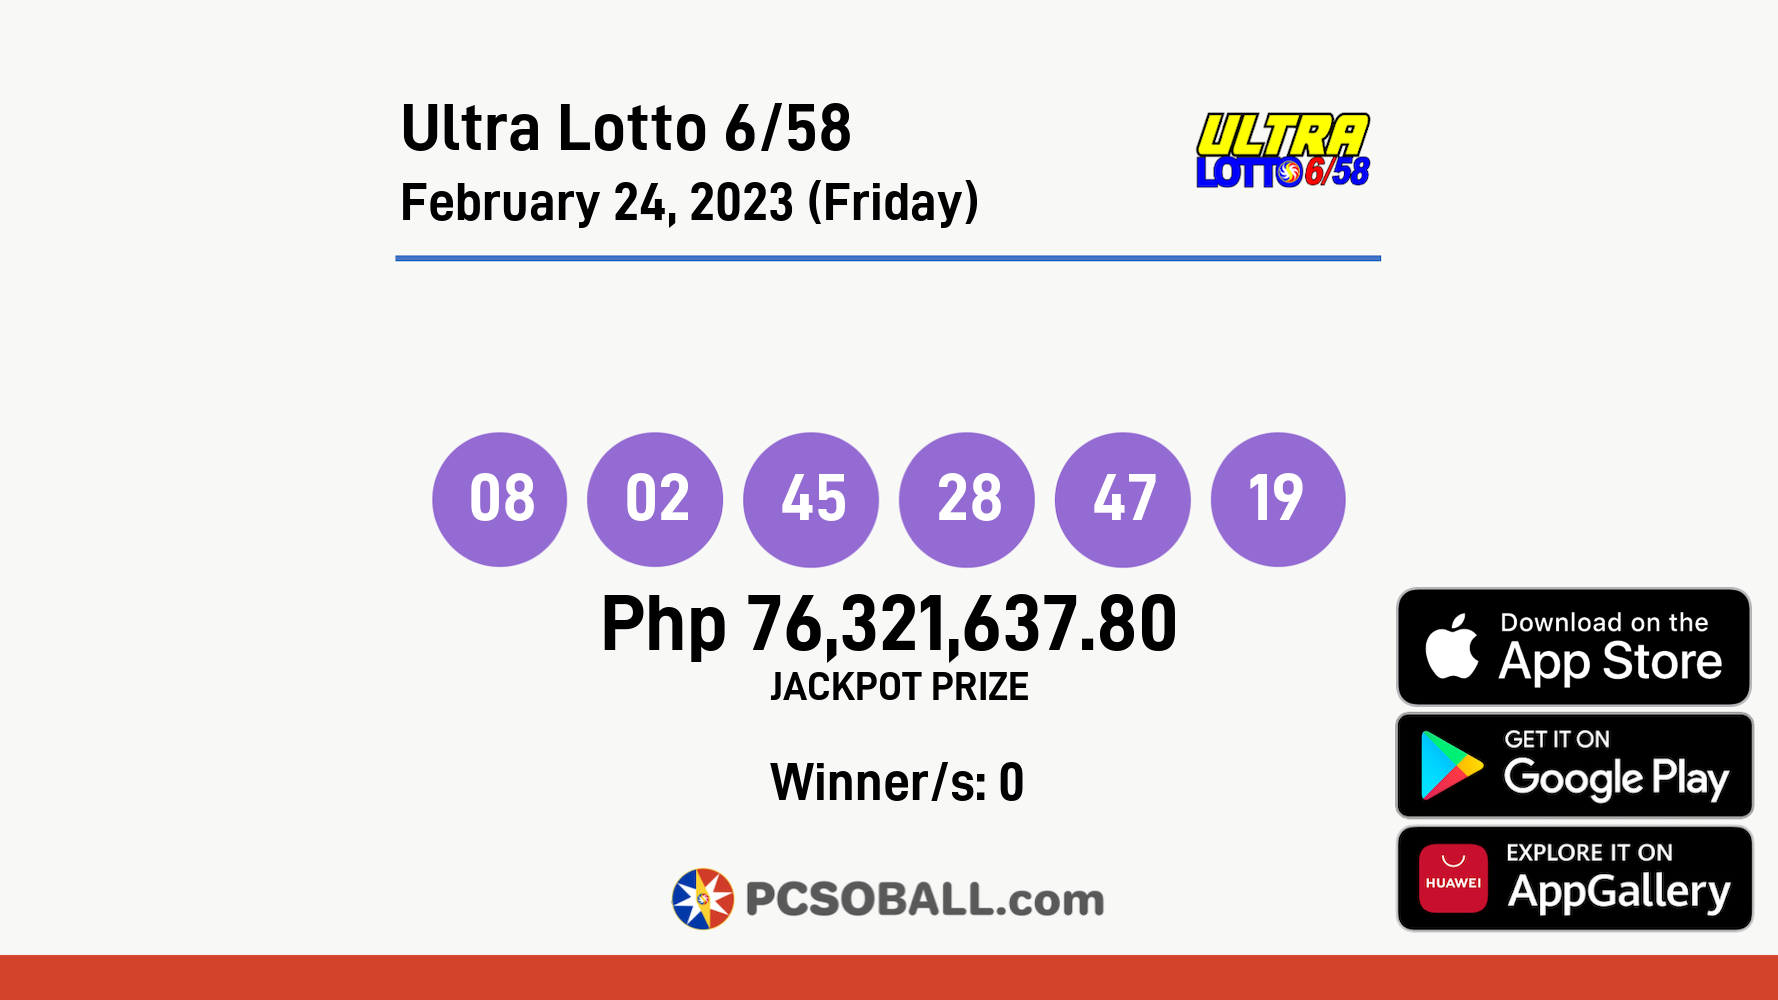 Ultra Lotto 6/58 February 24, 2023 (Friday) Result